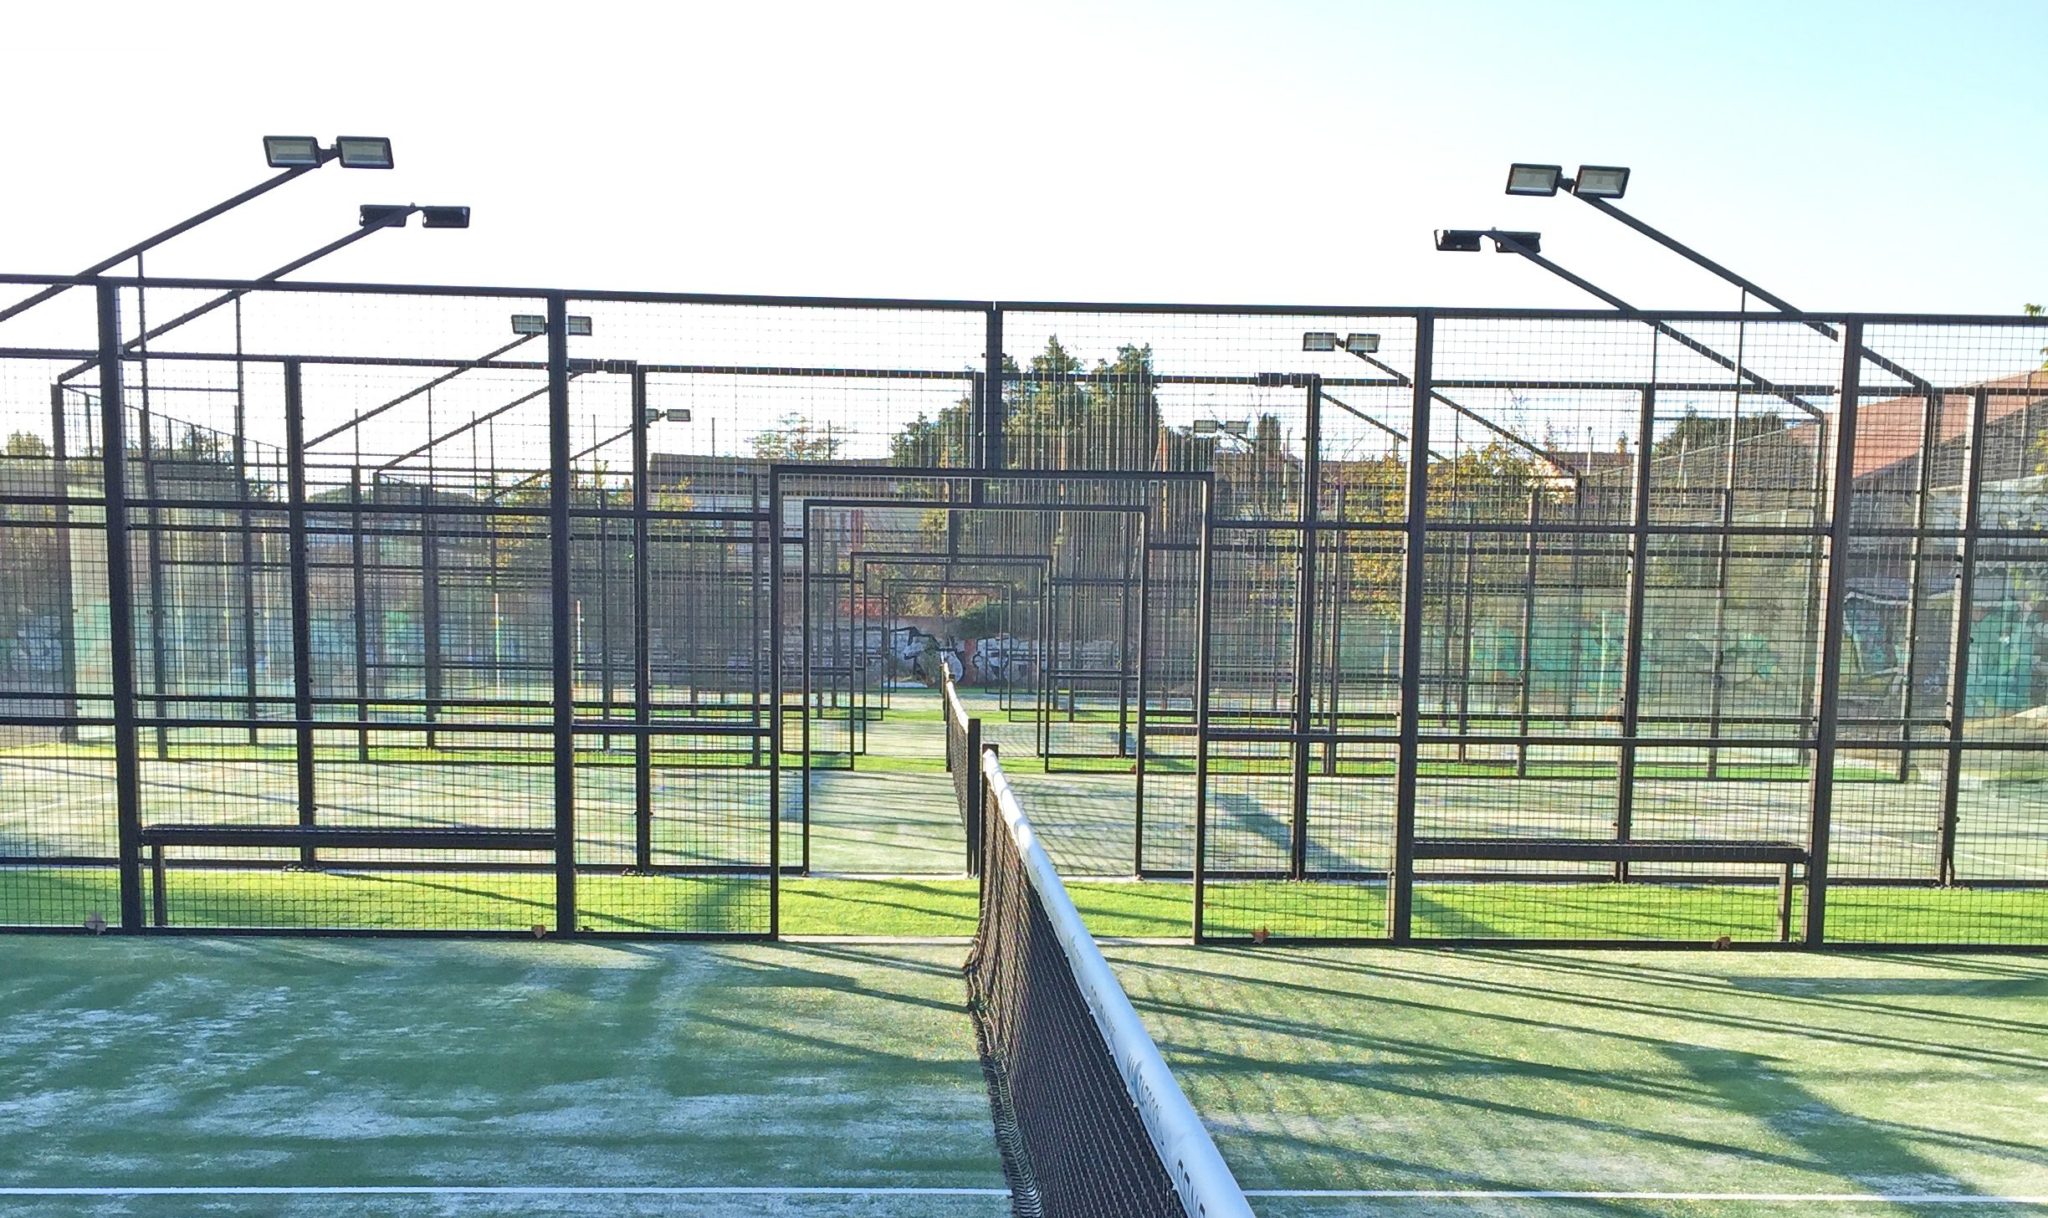 The Béziers Padel Club opens its doors on the 6th!